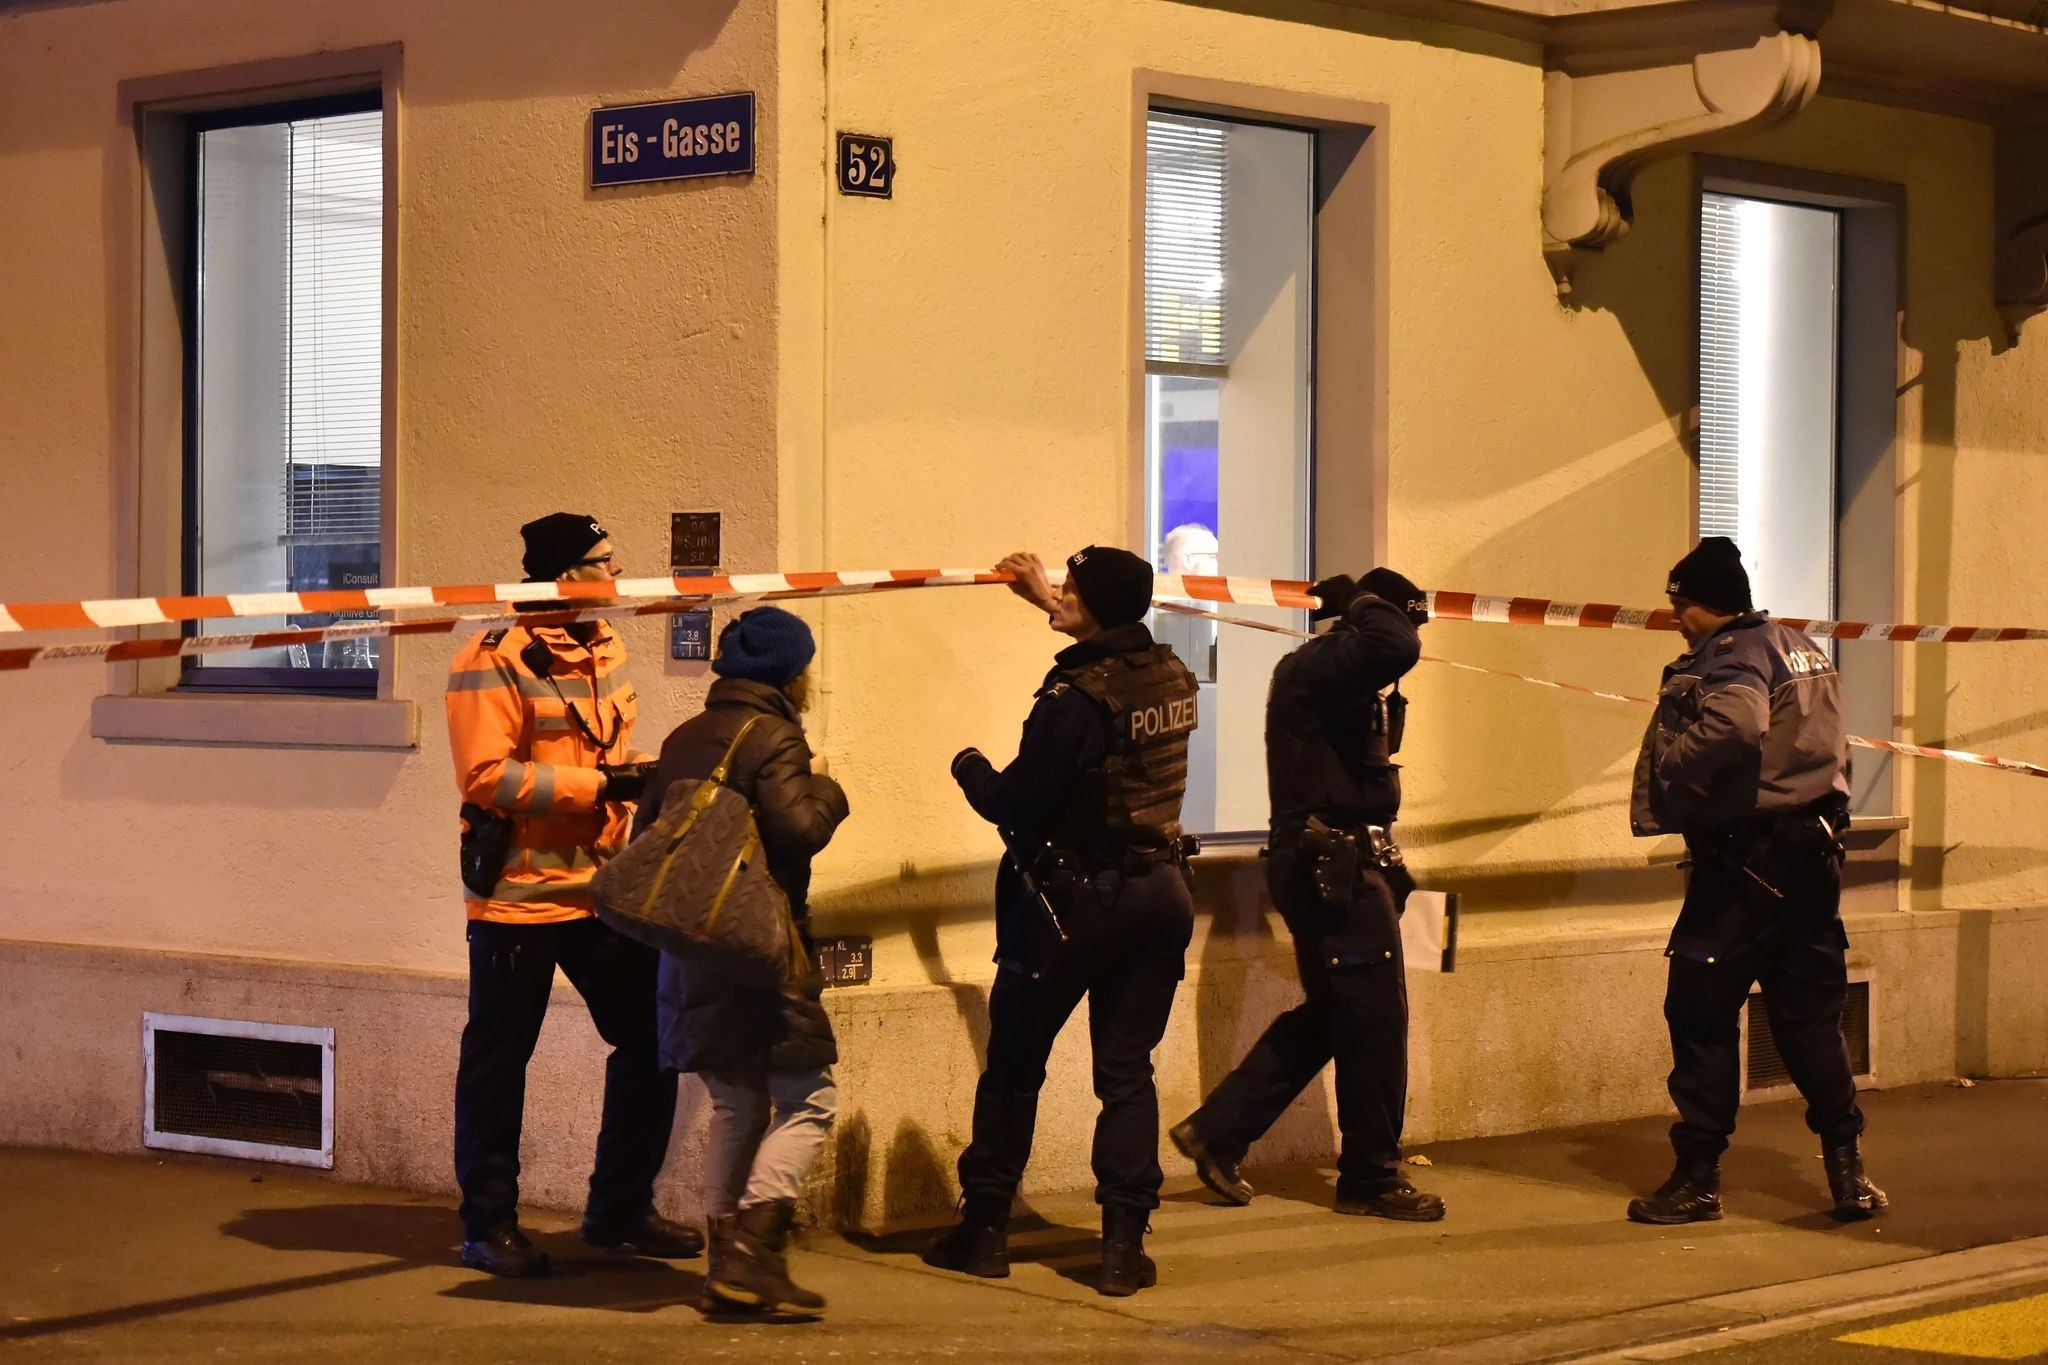 Swiss police walk behind a police cordon outside a Muslim prayer hall at the Eis-Gasse street, central Zurich, on December 19, 2016, after three people were injured by gunfire. (AFP Photo)